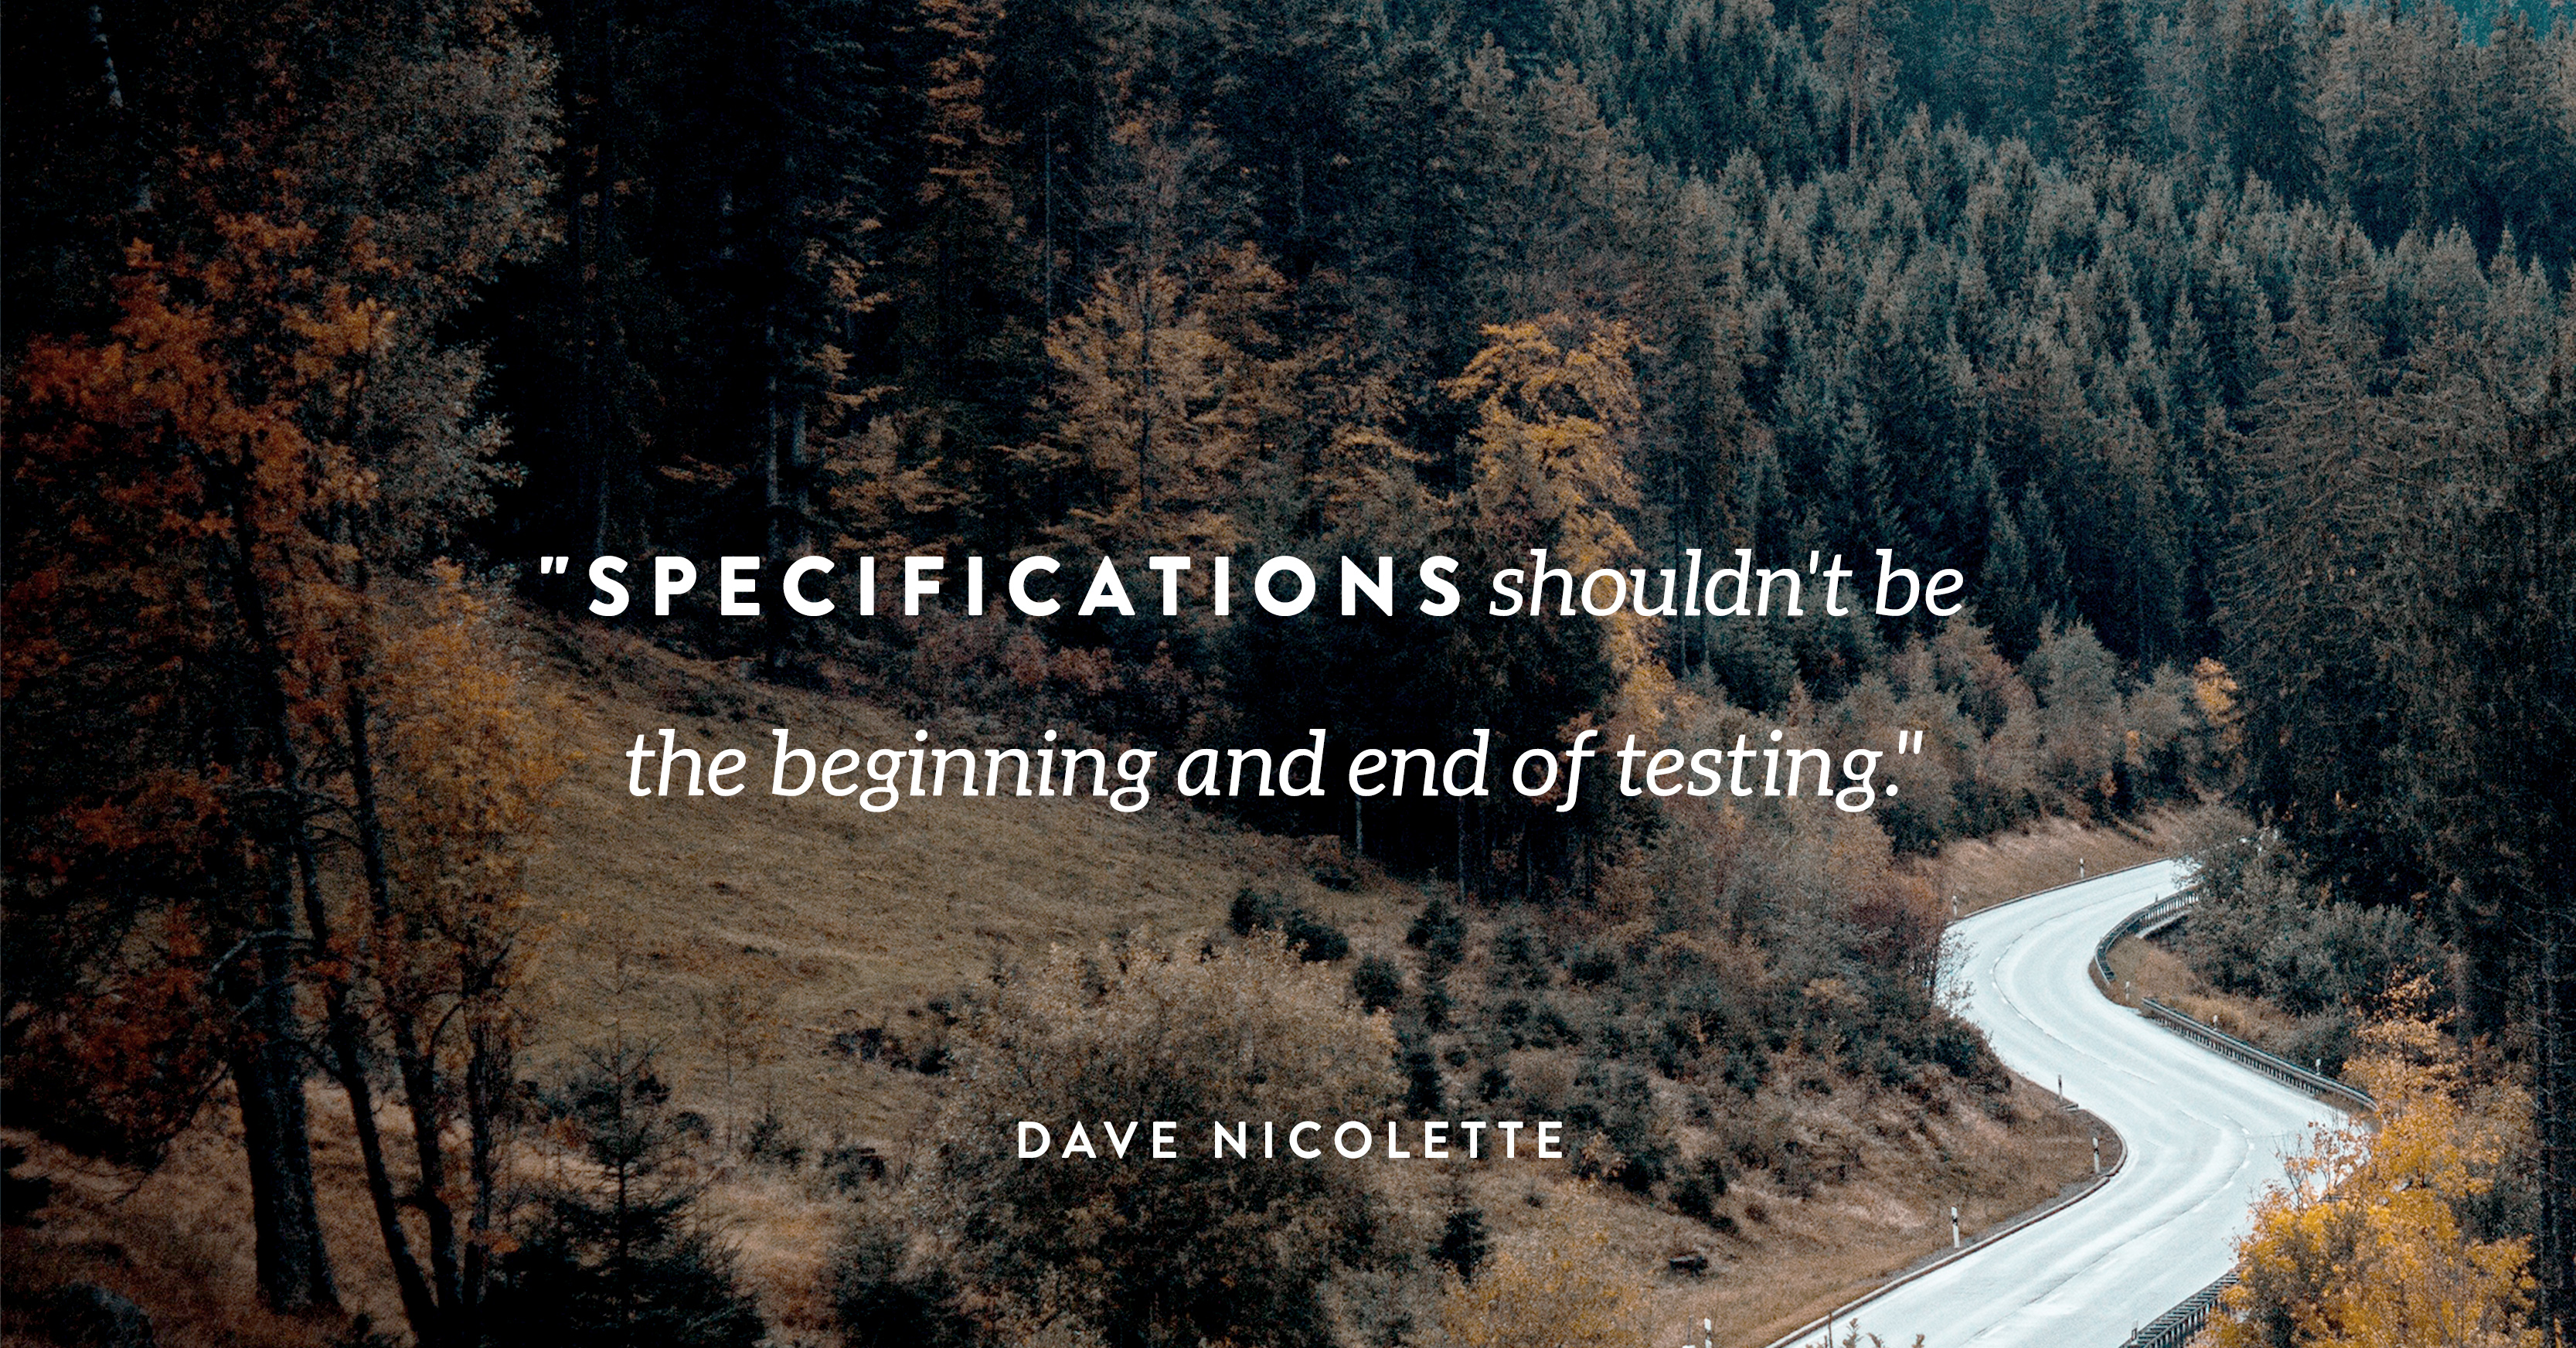 When to Stop Testing